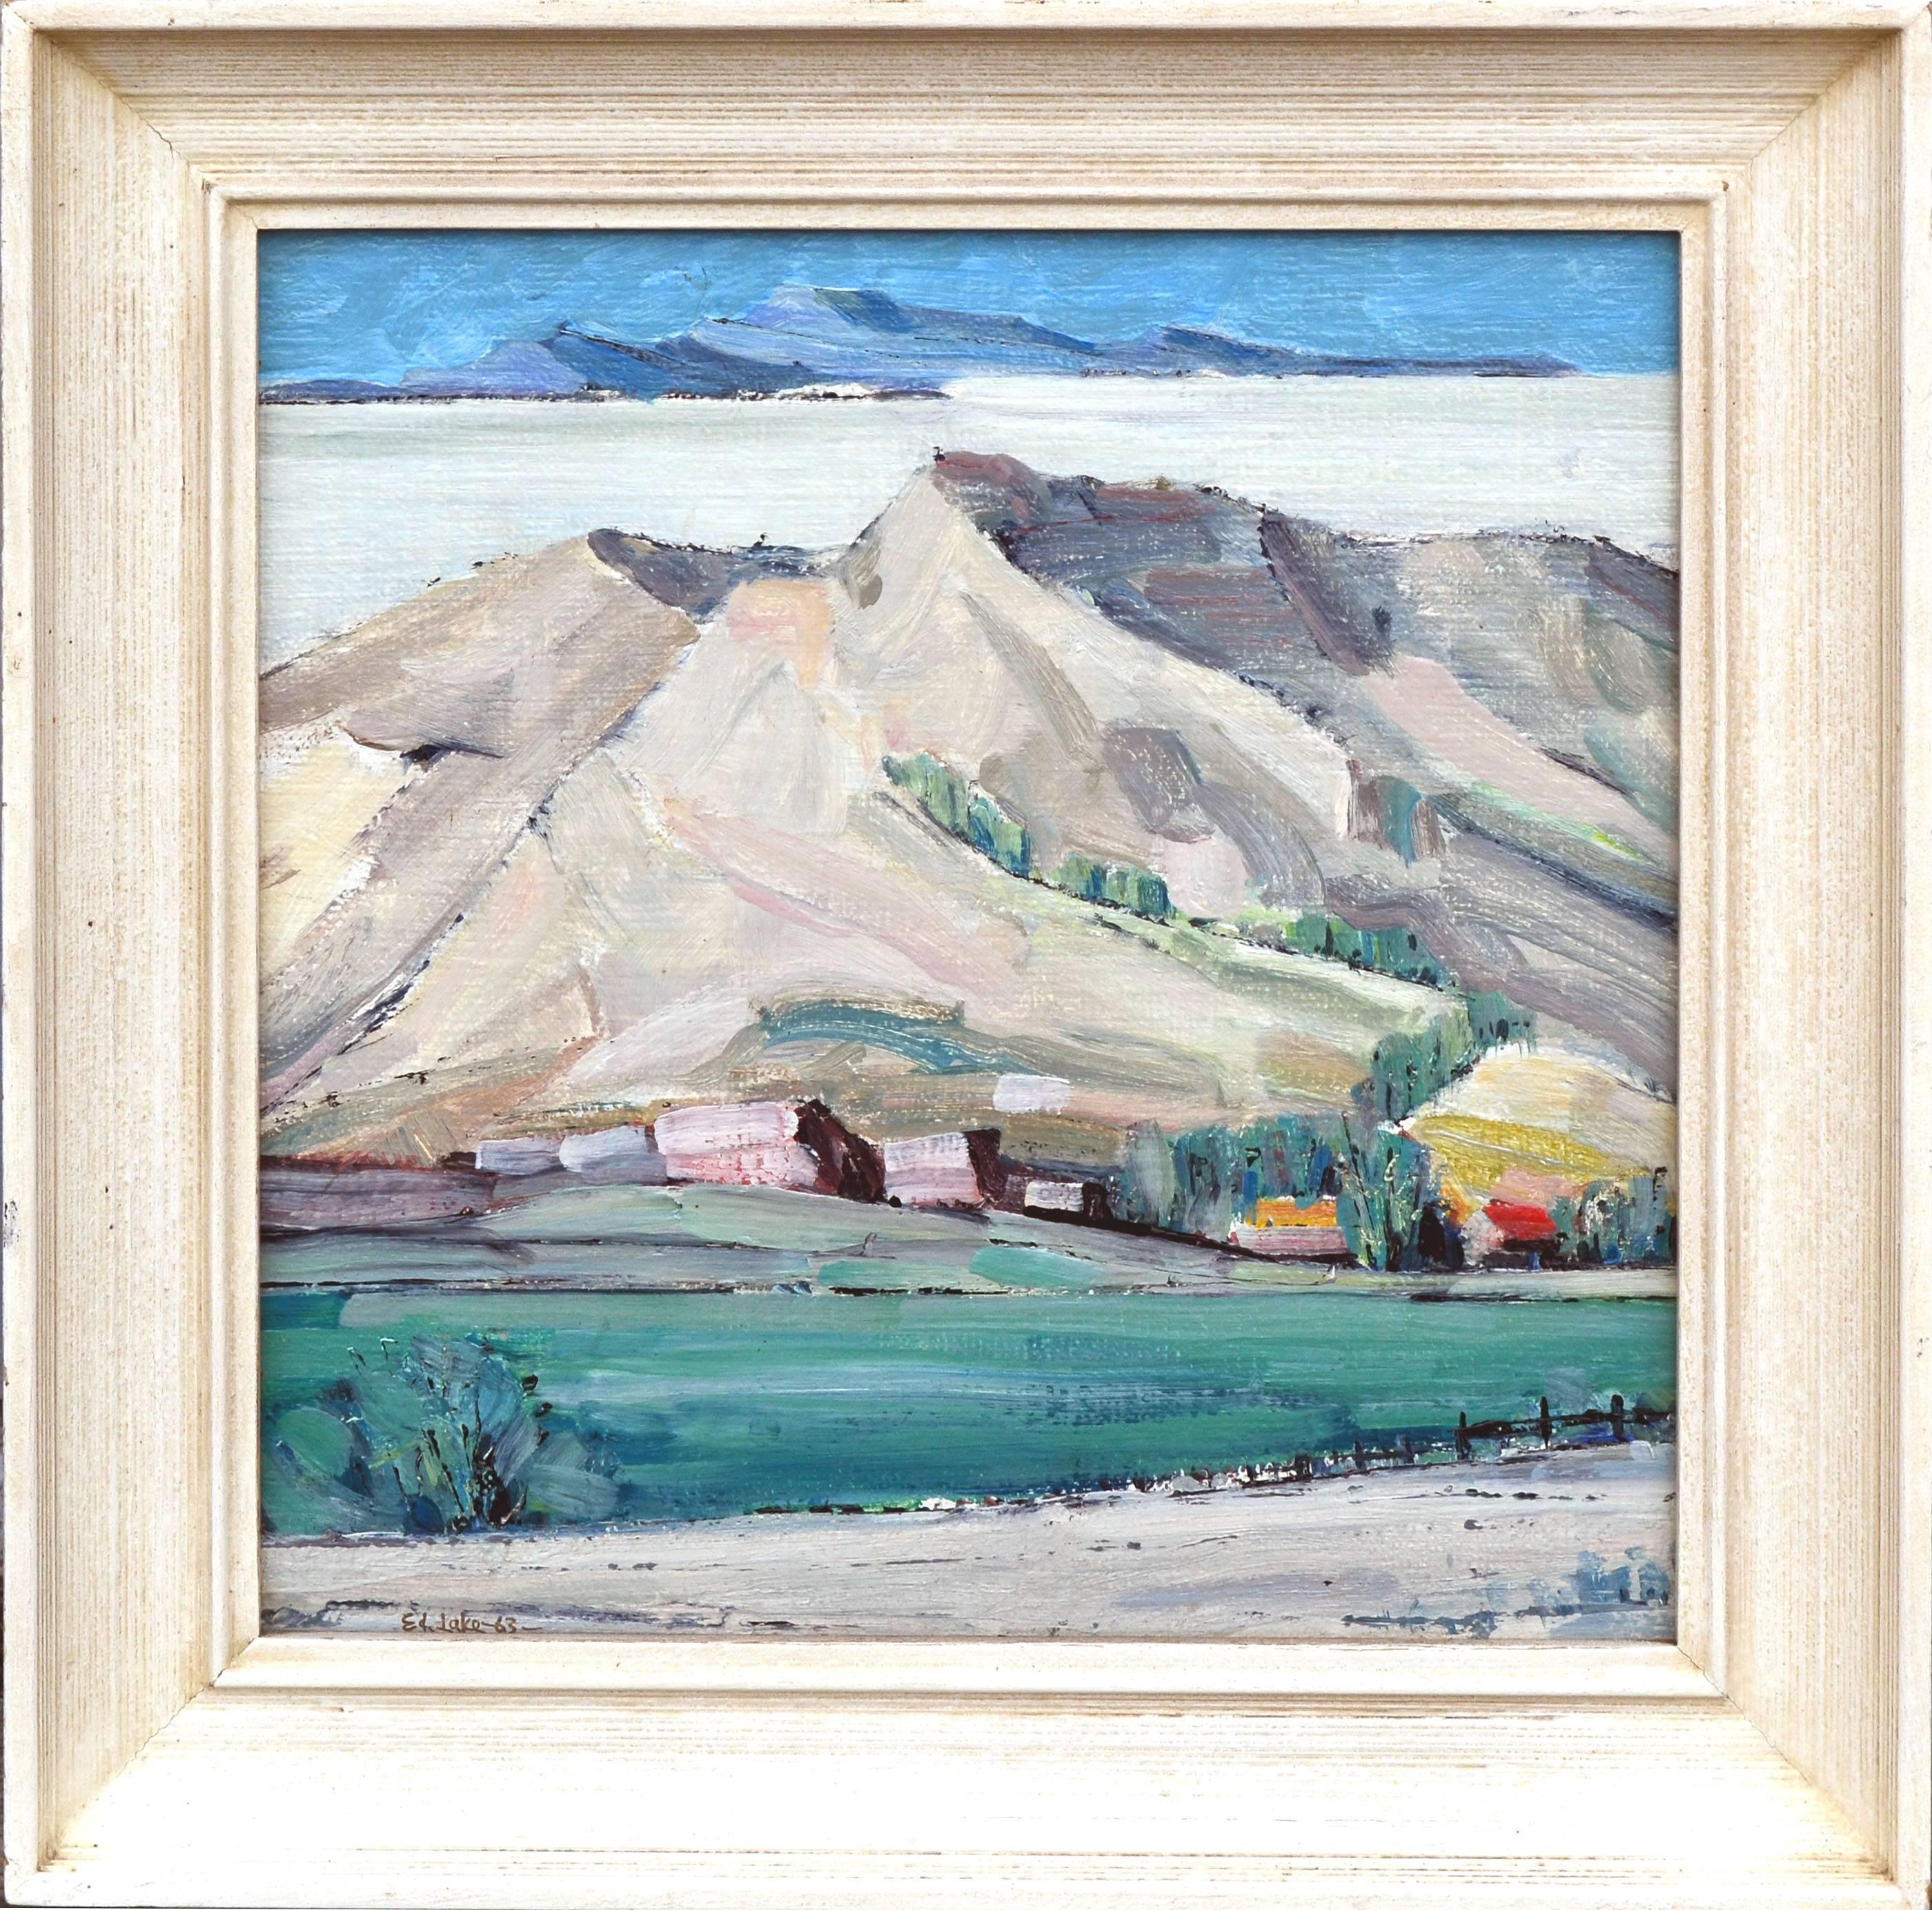 Nevada Ranch and Mountains  - Painting by Ed Lake